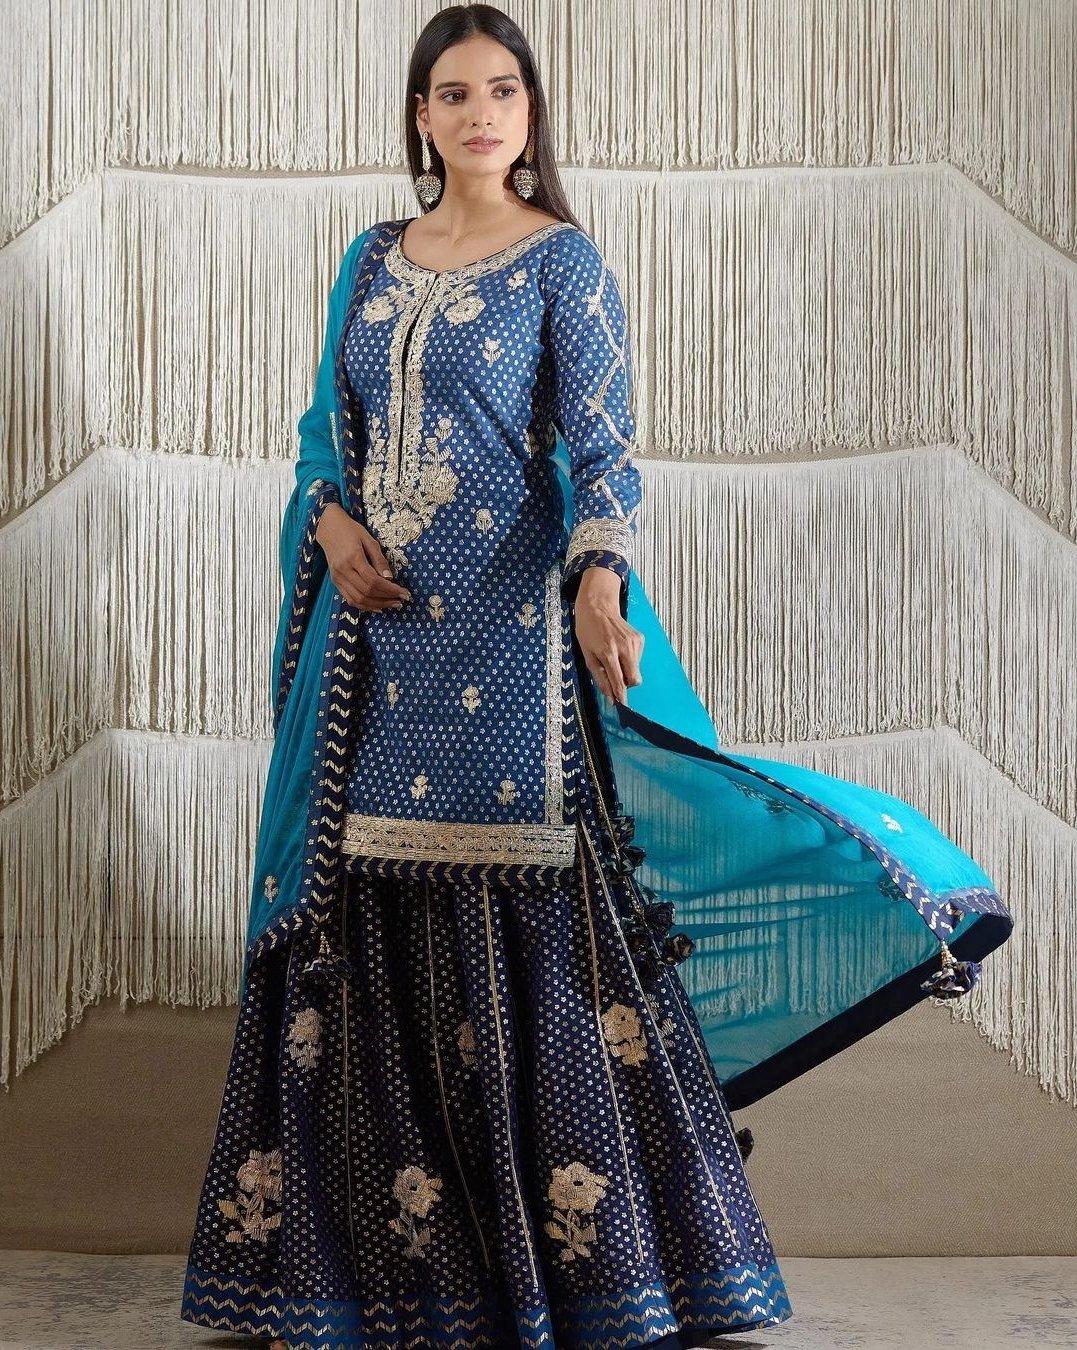 Different type of sharara dresses | TIC Blog – The Indian Couture